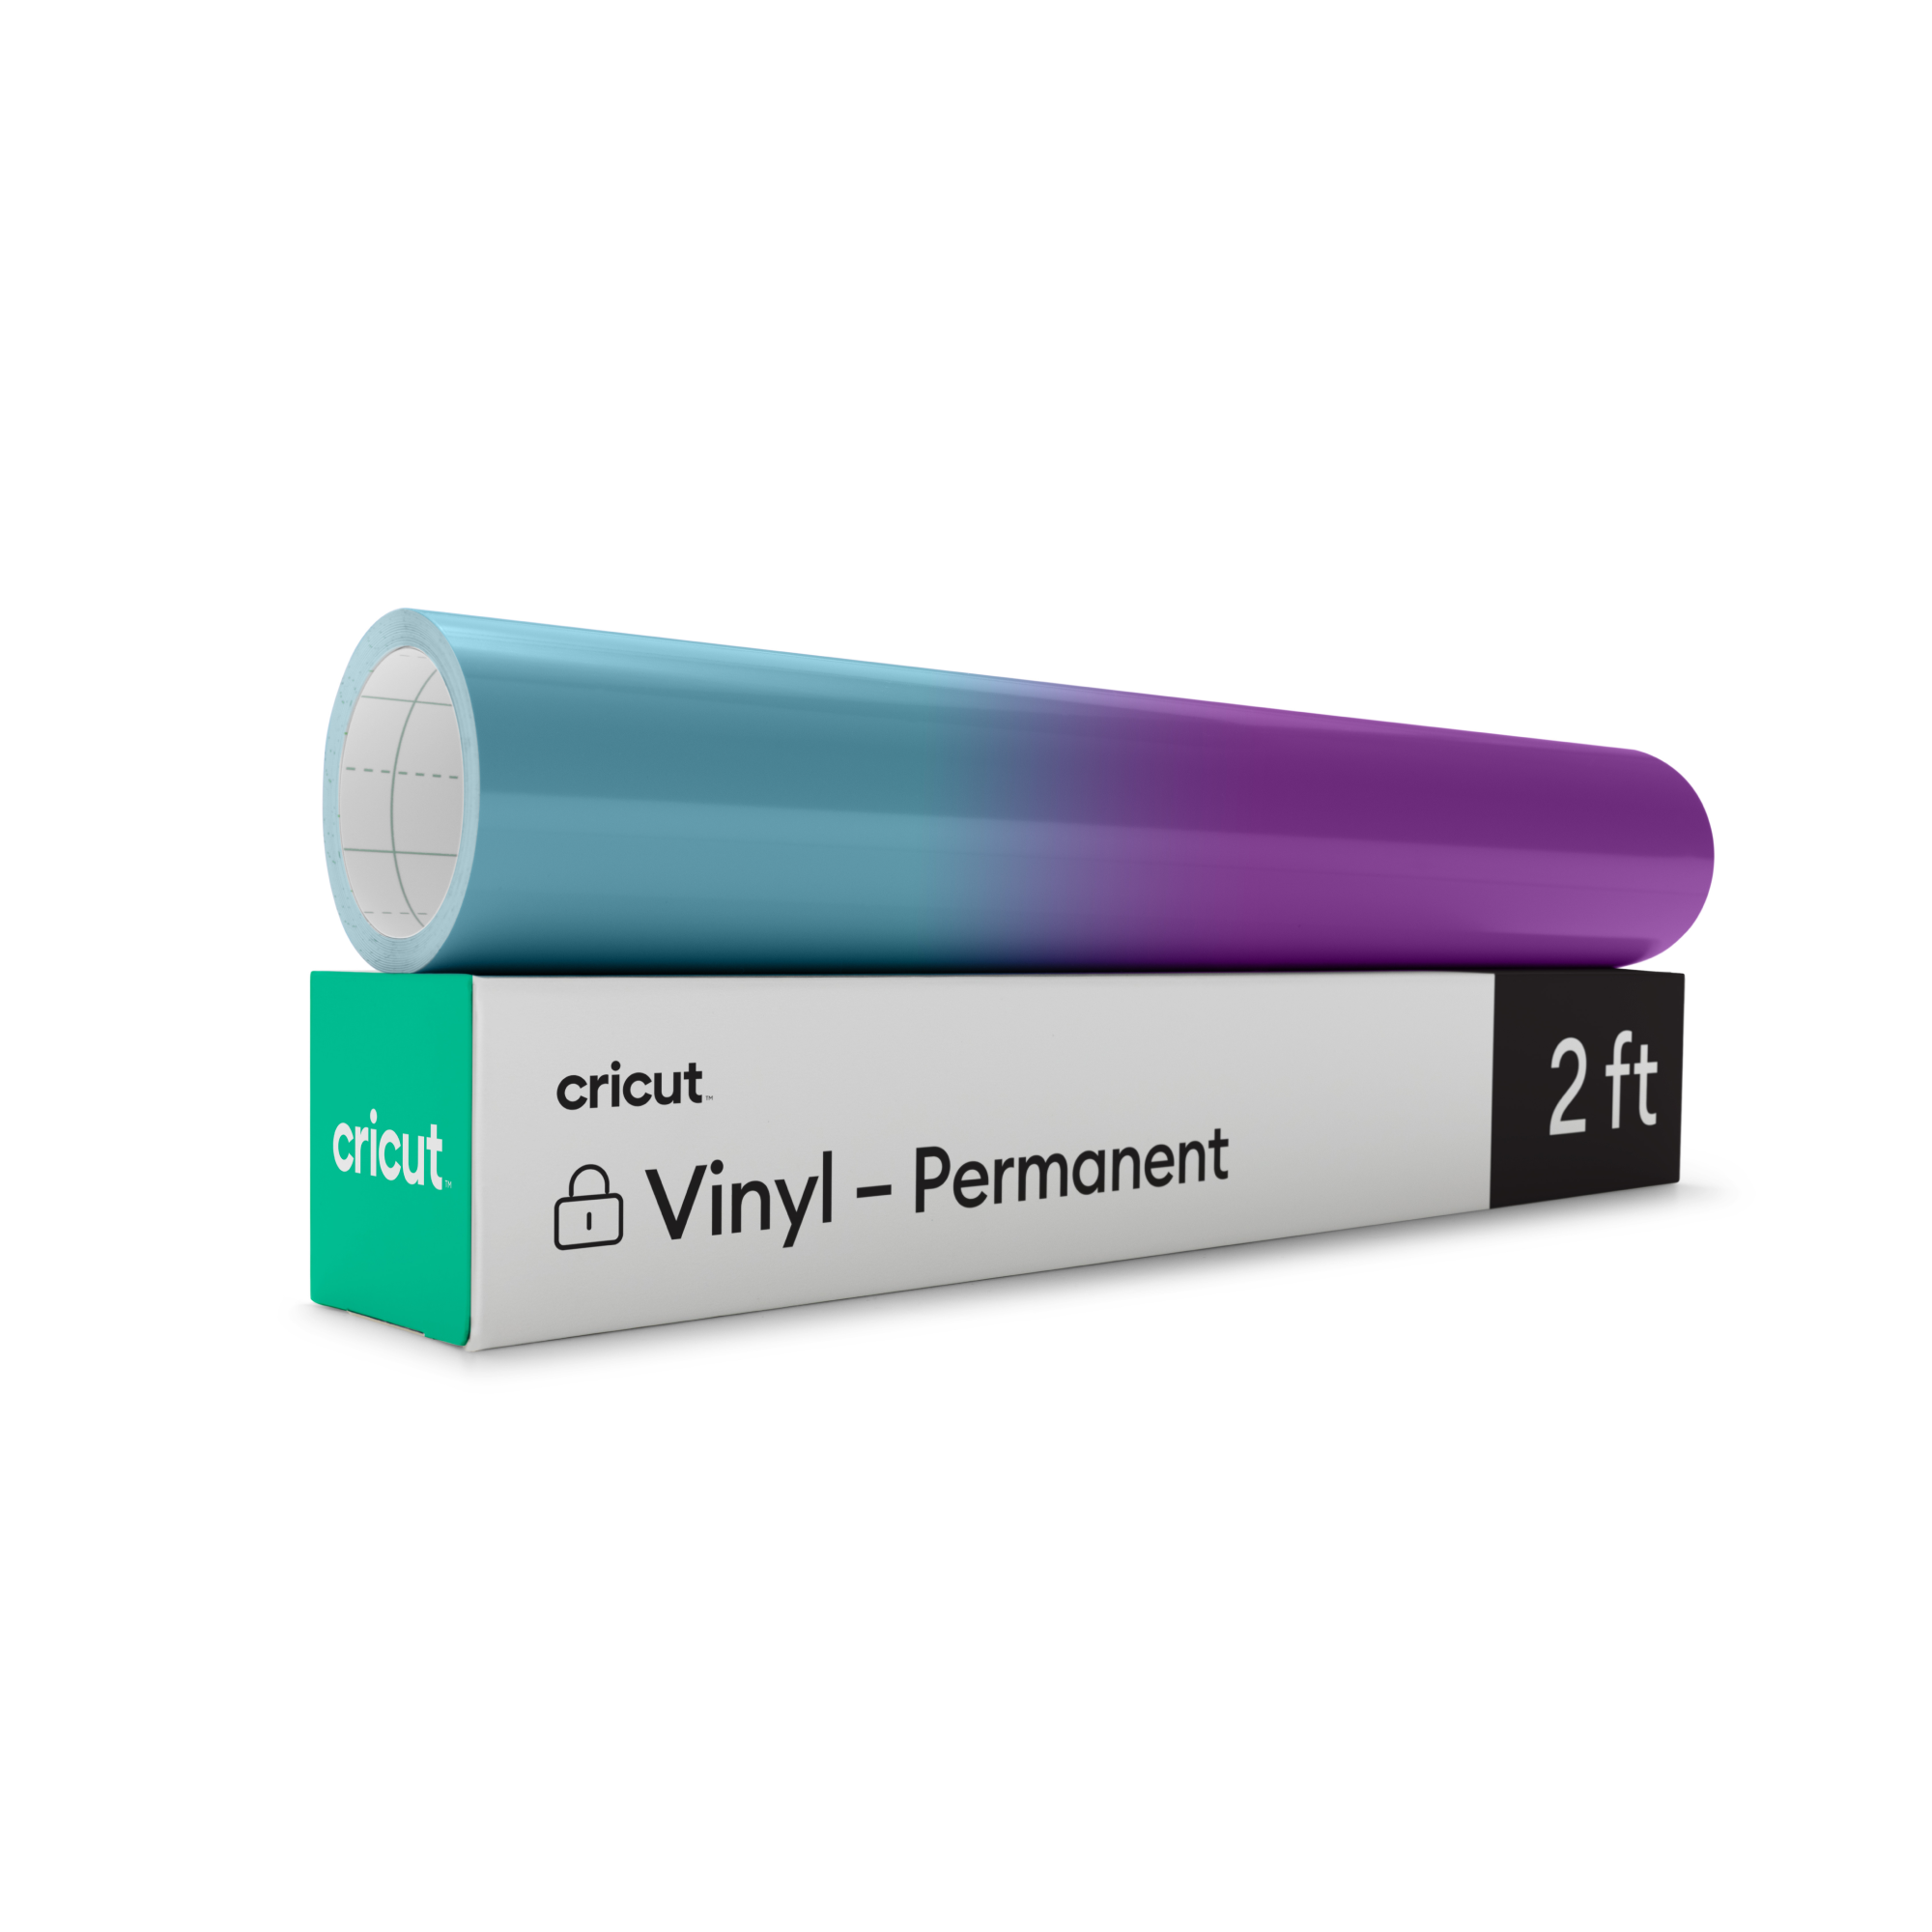 Cold Color Changing Vinyl for Cricut, Permanent Adhesive Vinyl 6 Sheets-12 x 10 Cold Color Changing Vinyl & 2 Transfer Tape Sheets for Craft